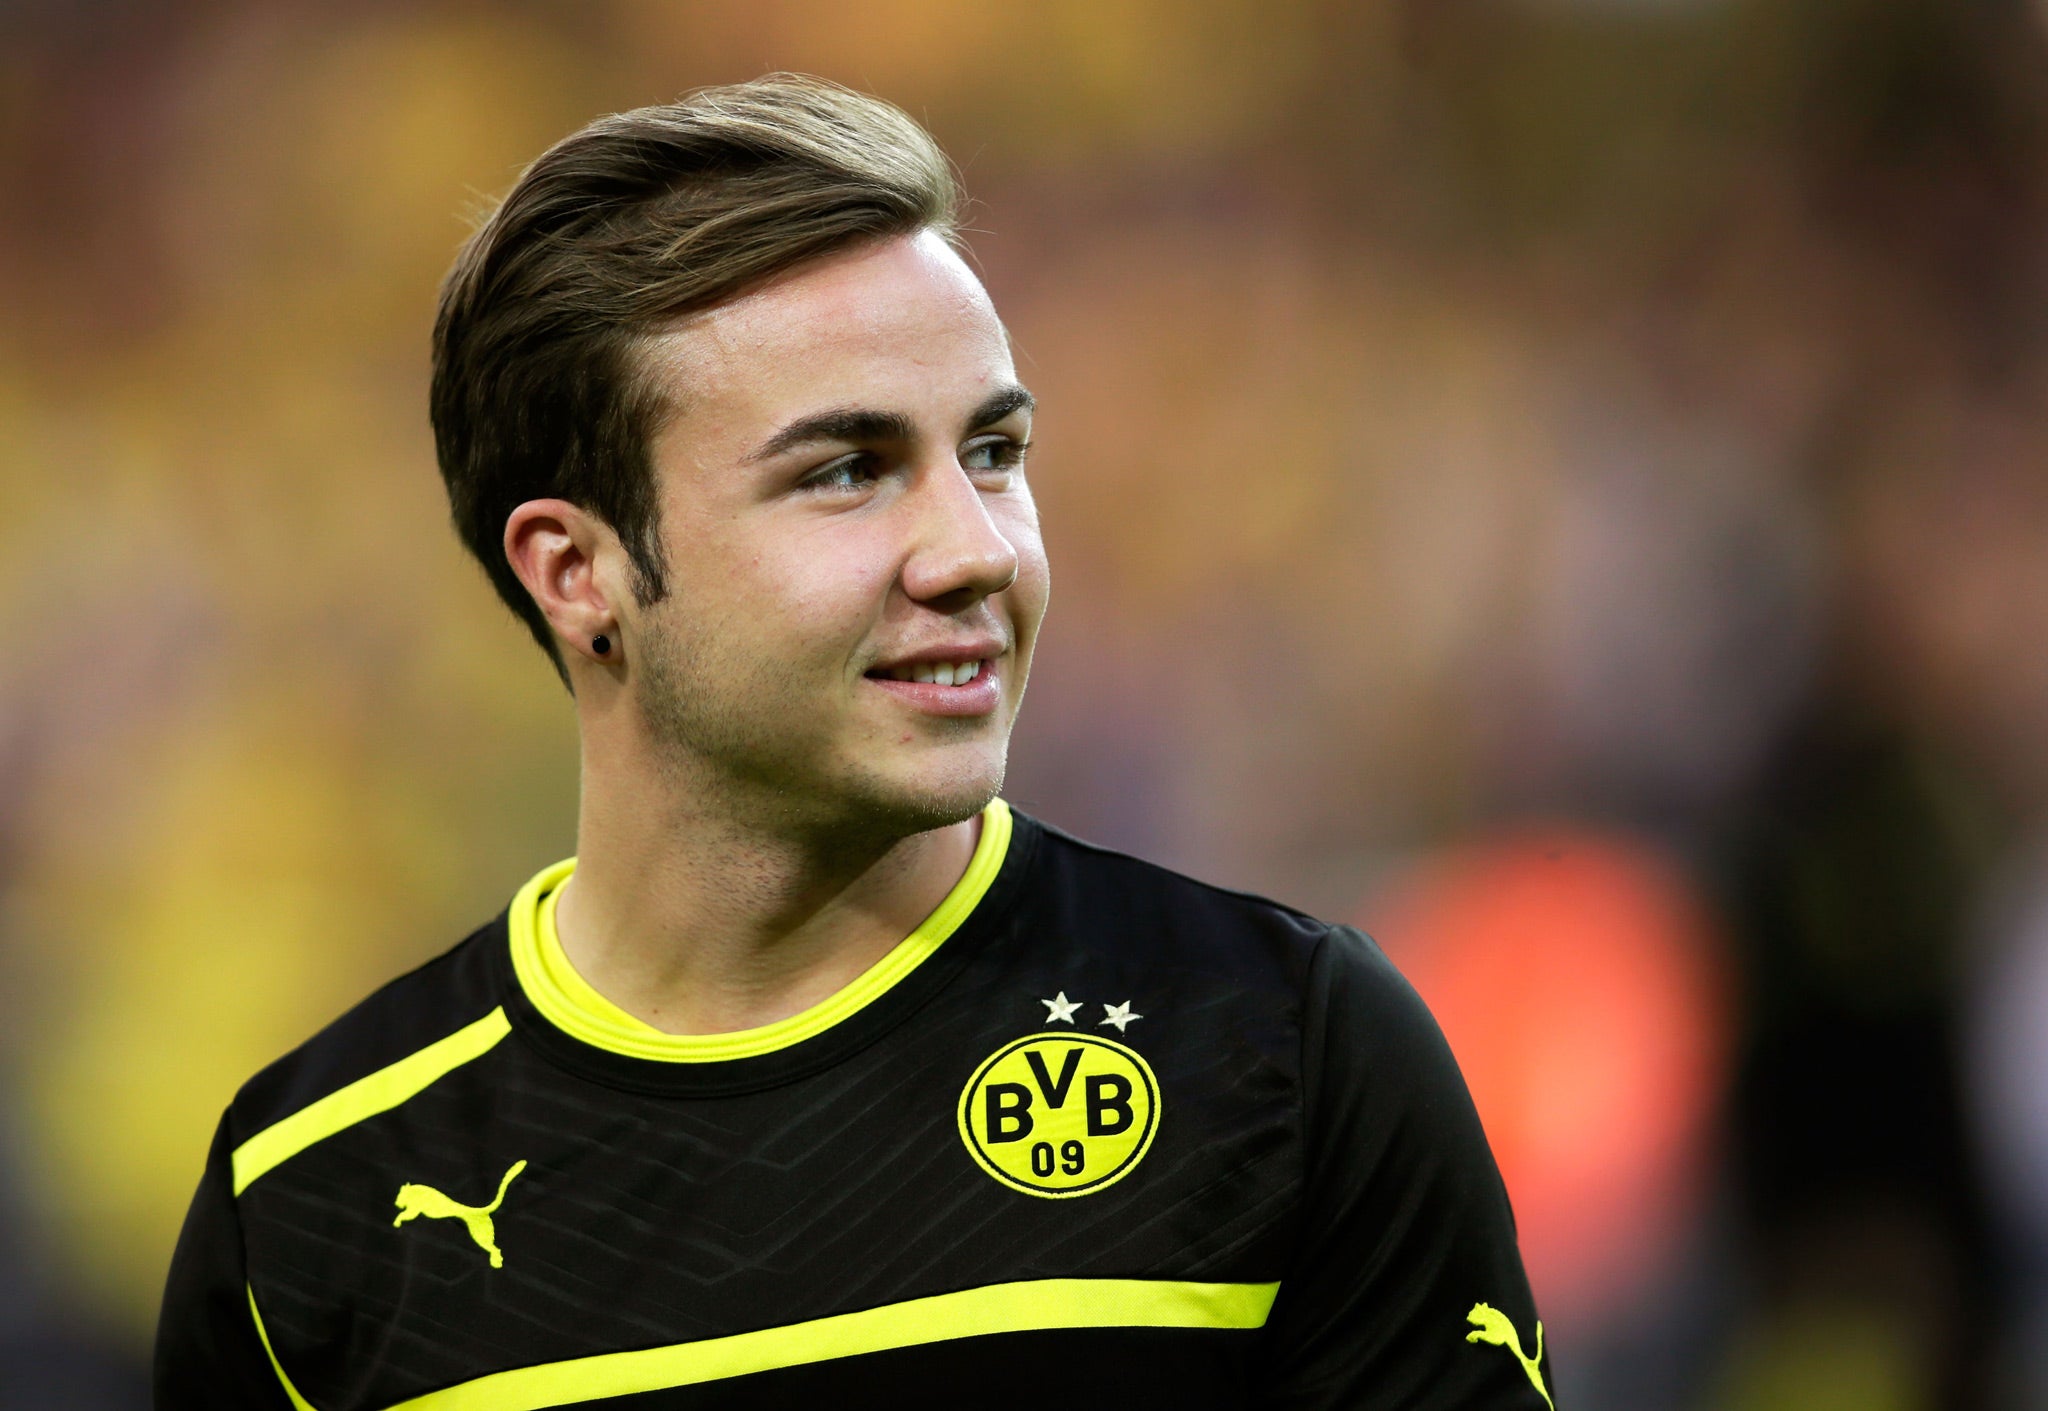 Mario Gotze will miss the Champions League final for Borussia Dortmund with a thigh injury